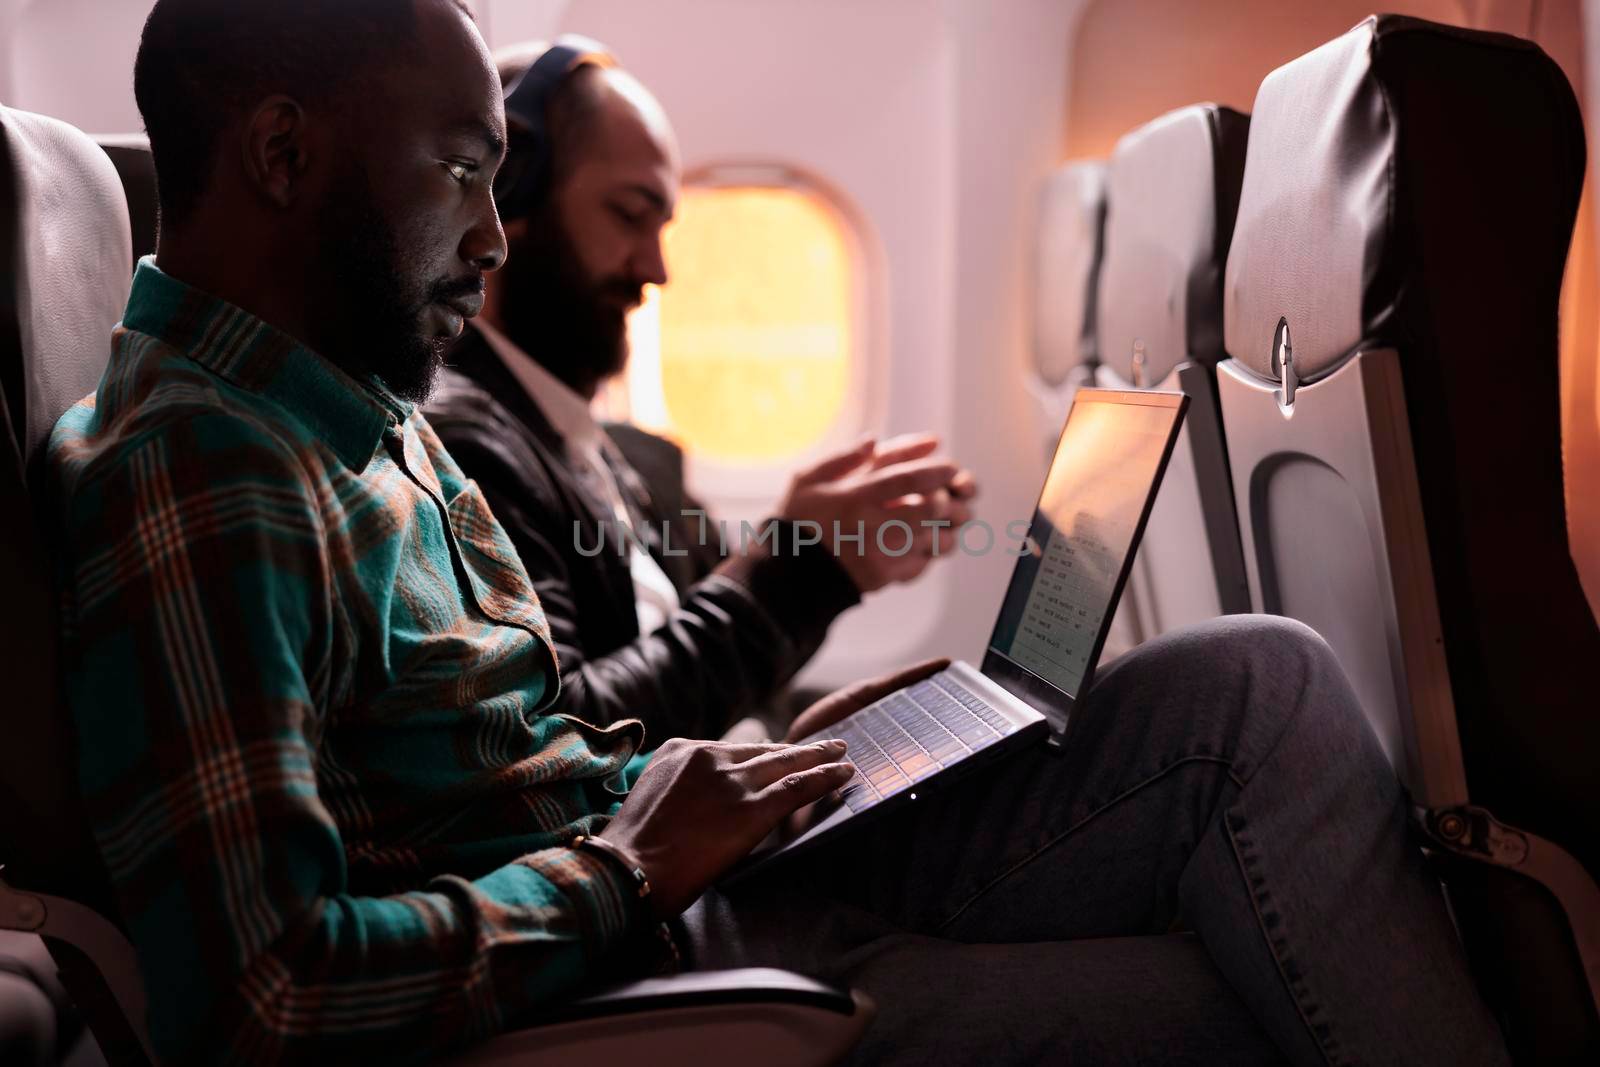 African american male freelancer working on laptop during sunset flight, waiting to arrive at holiday destination. Flying in economy class with group of tourists, using computer online.